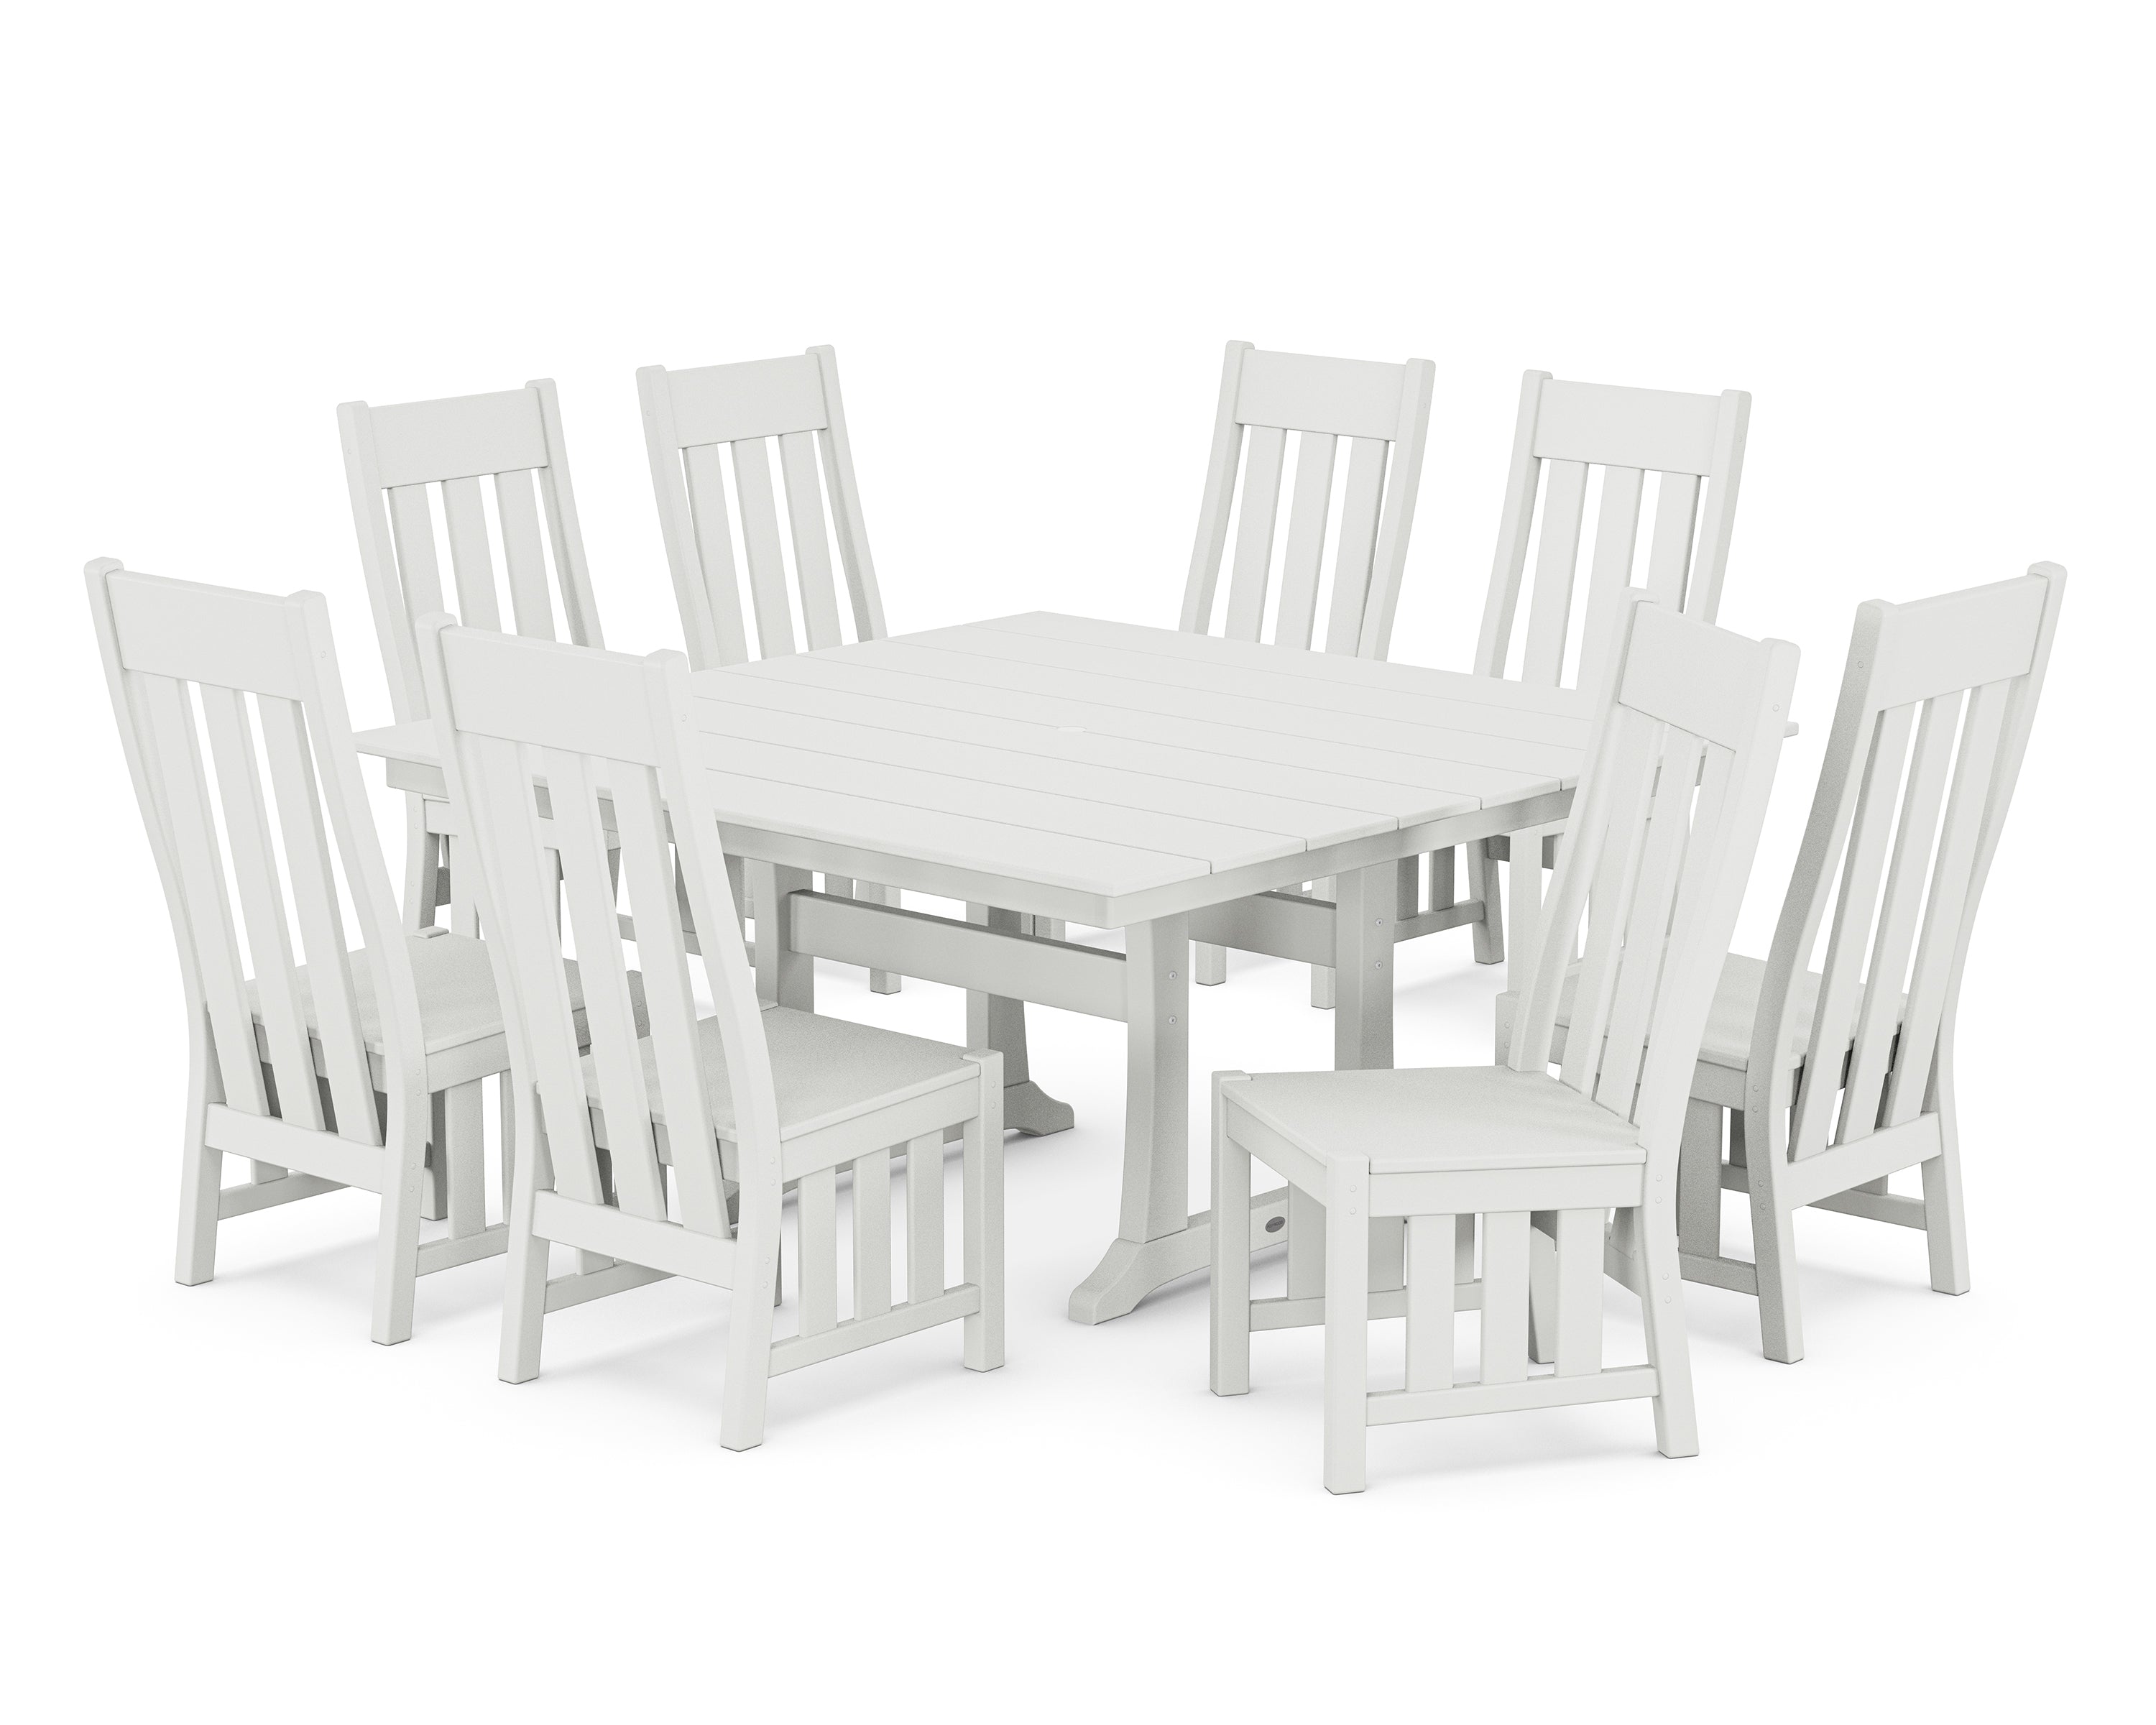 Martha Stewart by POLYWOOD® Acadia Side Chair 9-Piece Square Farmhouse Dining Set with Trestle Legs in White